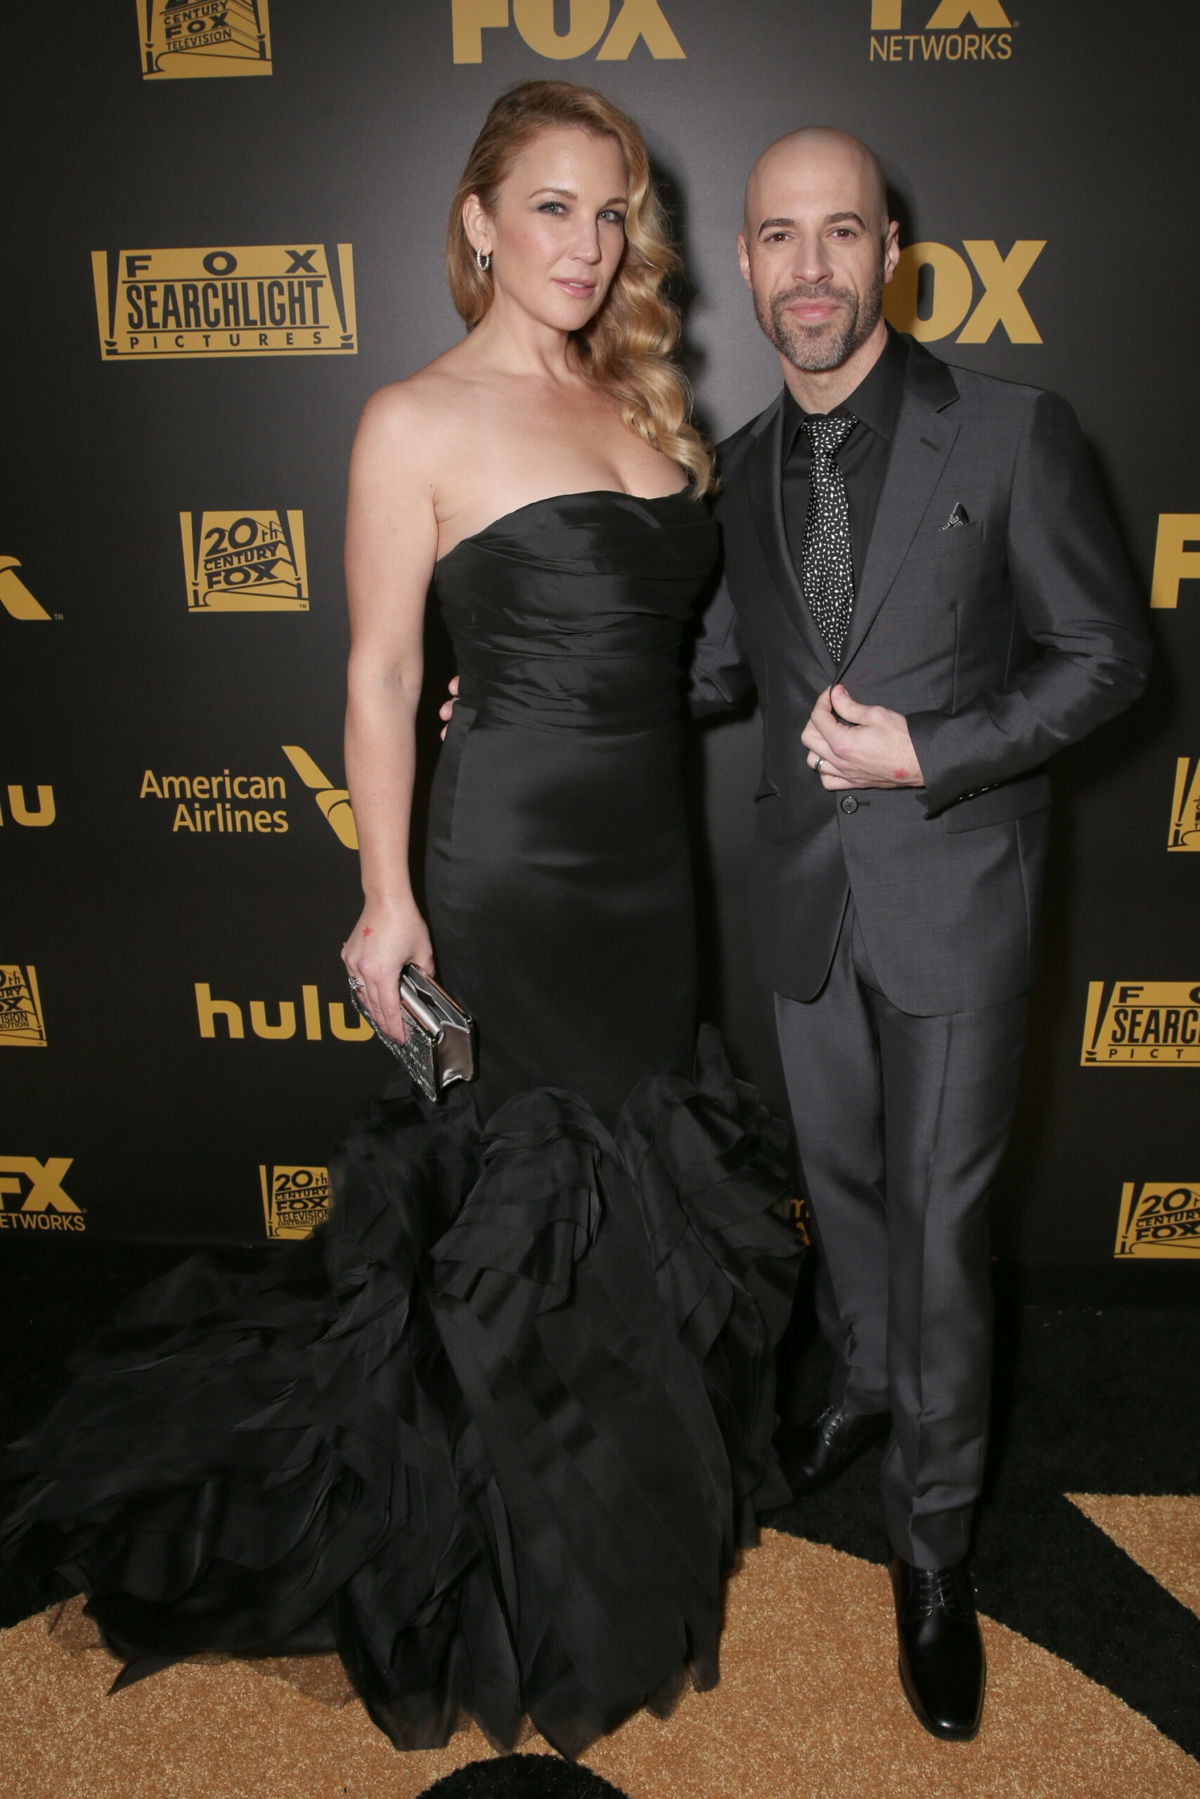 <i>Todd Williamson/Getty Images</i><br/>Deanna Daughtry is denying that she and her husband Chris Daughtry are fueling about their adult daughter's death. Deanna Daughtry and Chris Daughtry are shown here at an event in 2016.